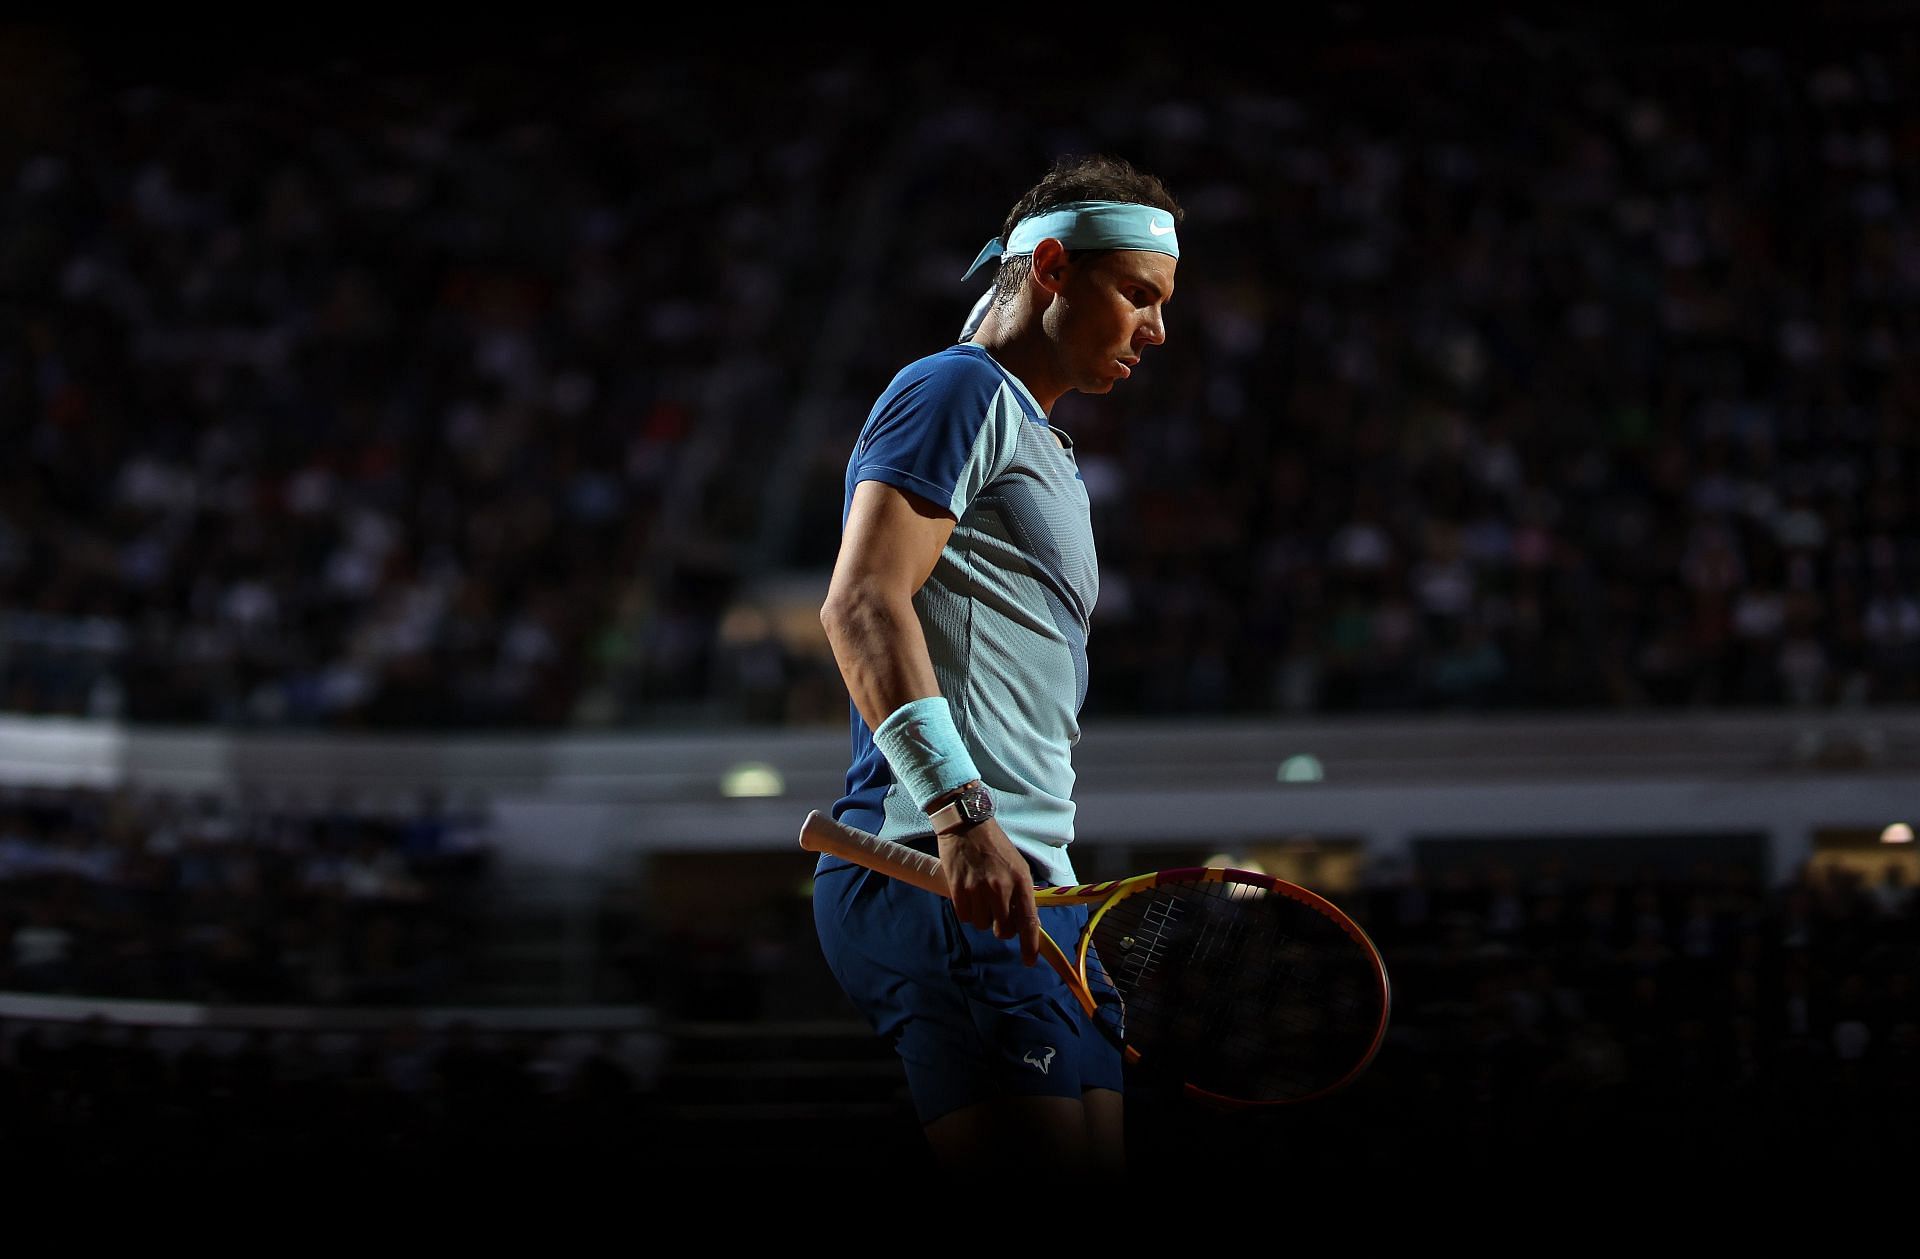 Rafael Nadal was eliminated in the last 16 of the Italian Open.